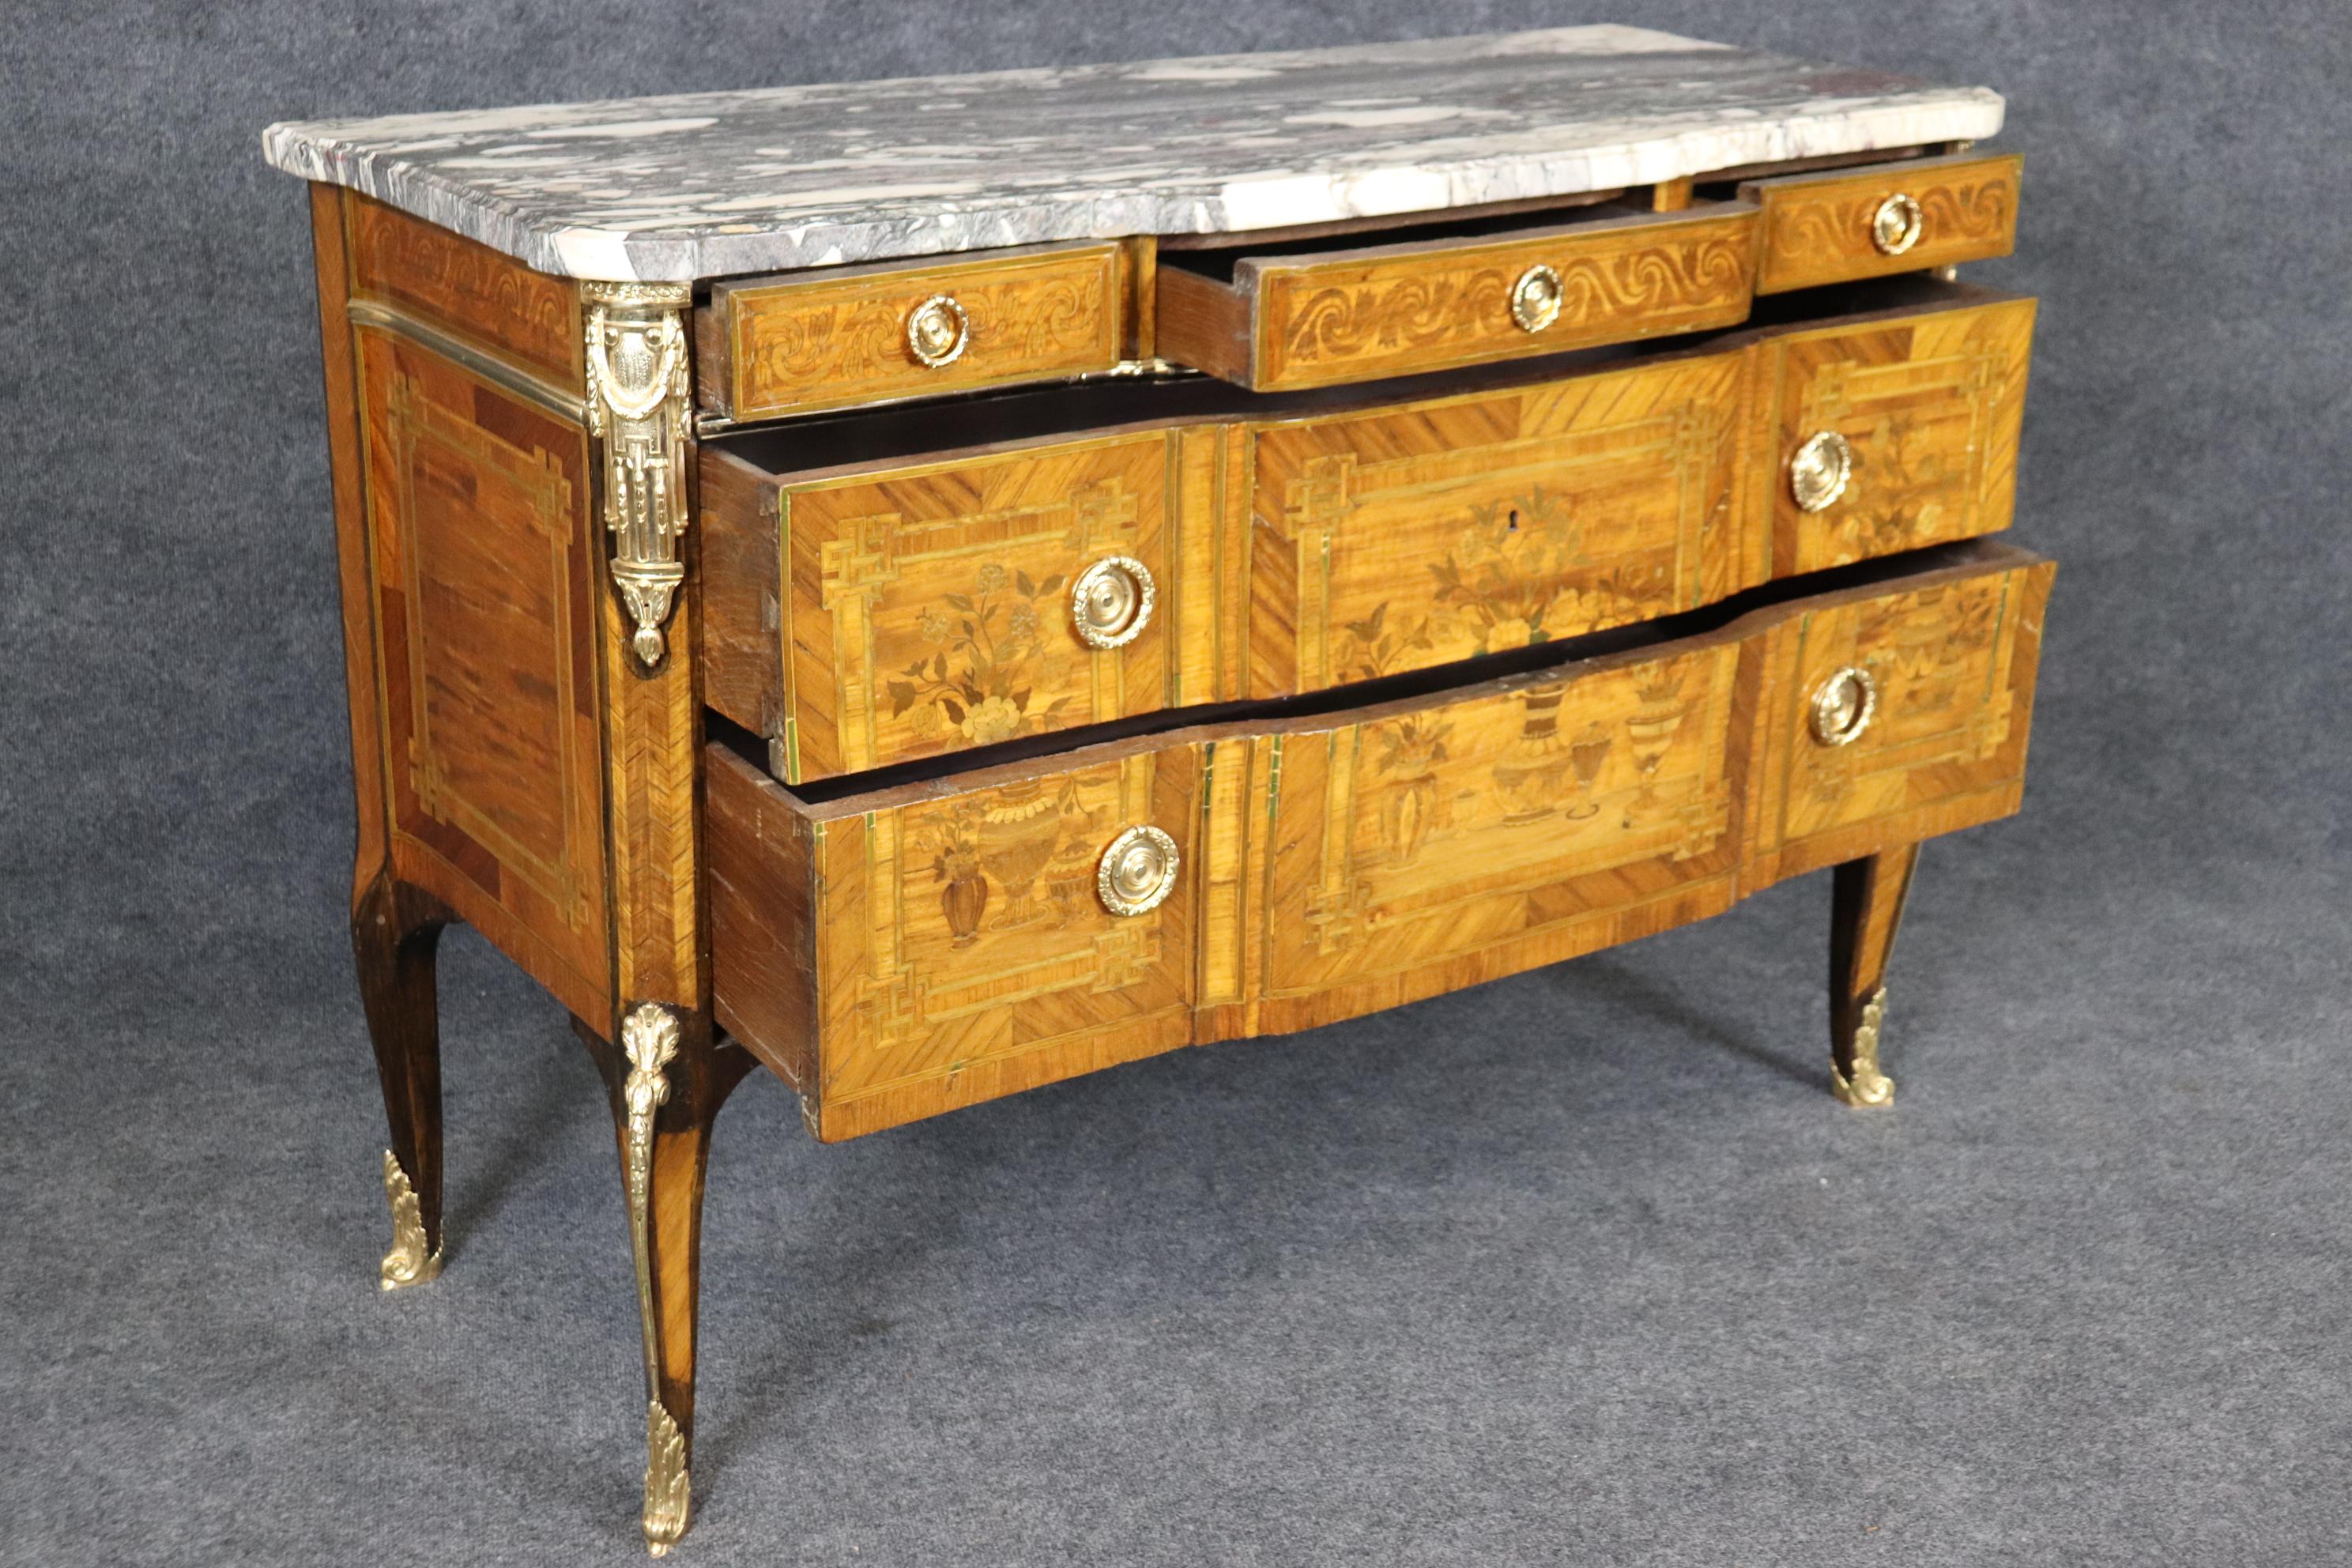 This is a spectacular and brightly polished bronze and brass ormolu adorned commode in the French Louis XV style. The piece has inlai and is in good antique condition with minor signs of use and age. The marble top is stunning and has a great